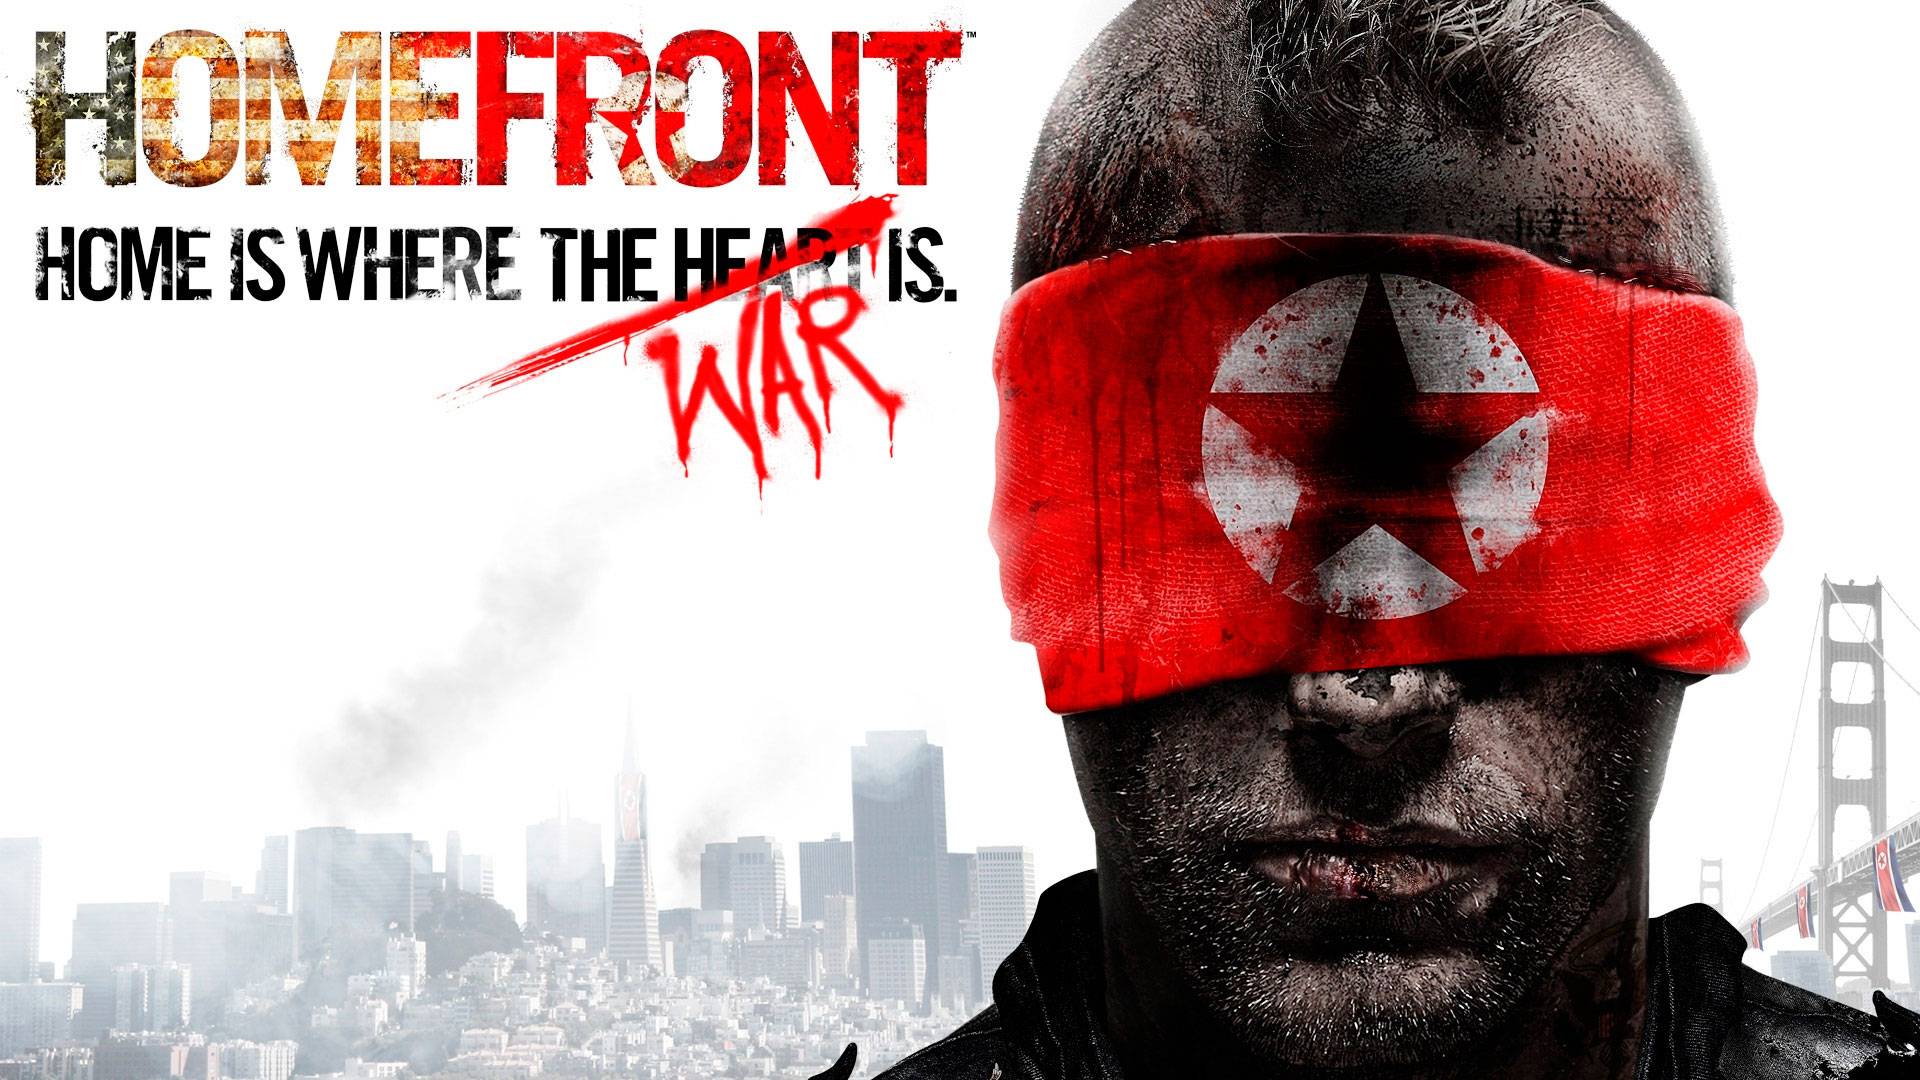 Homefront Wallpaper in full 1080P HD « Video Game News, Reviews